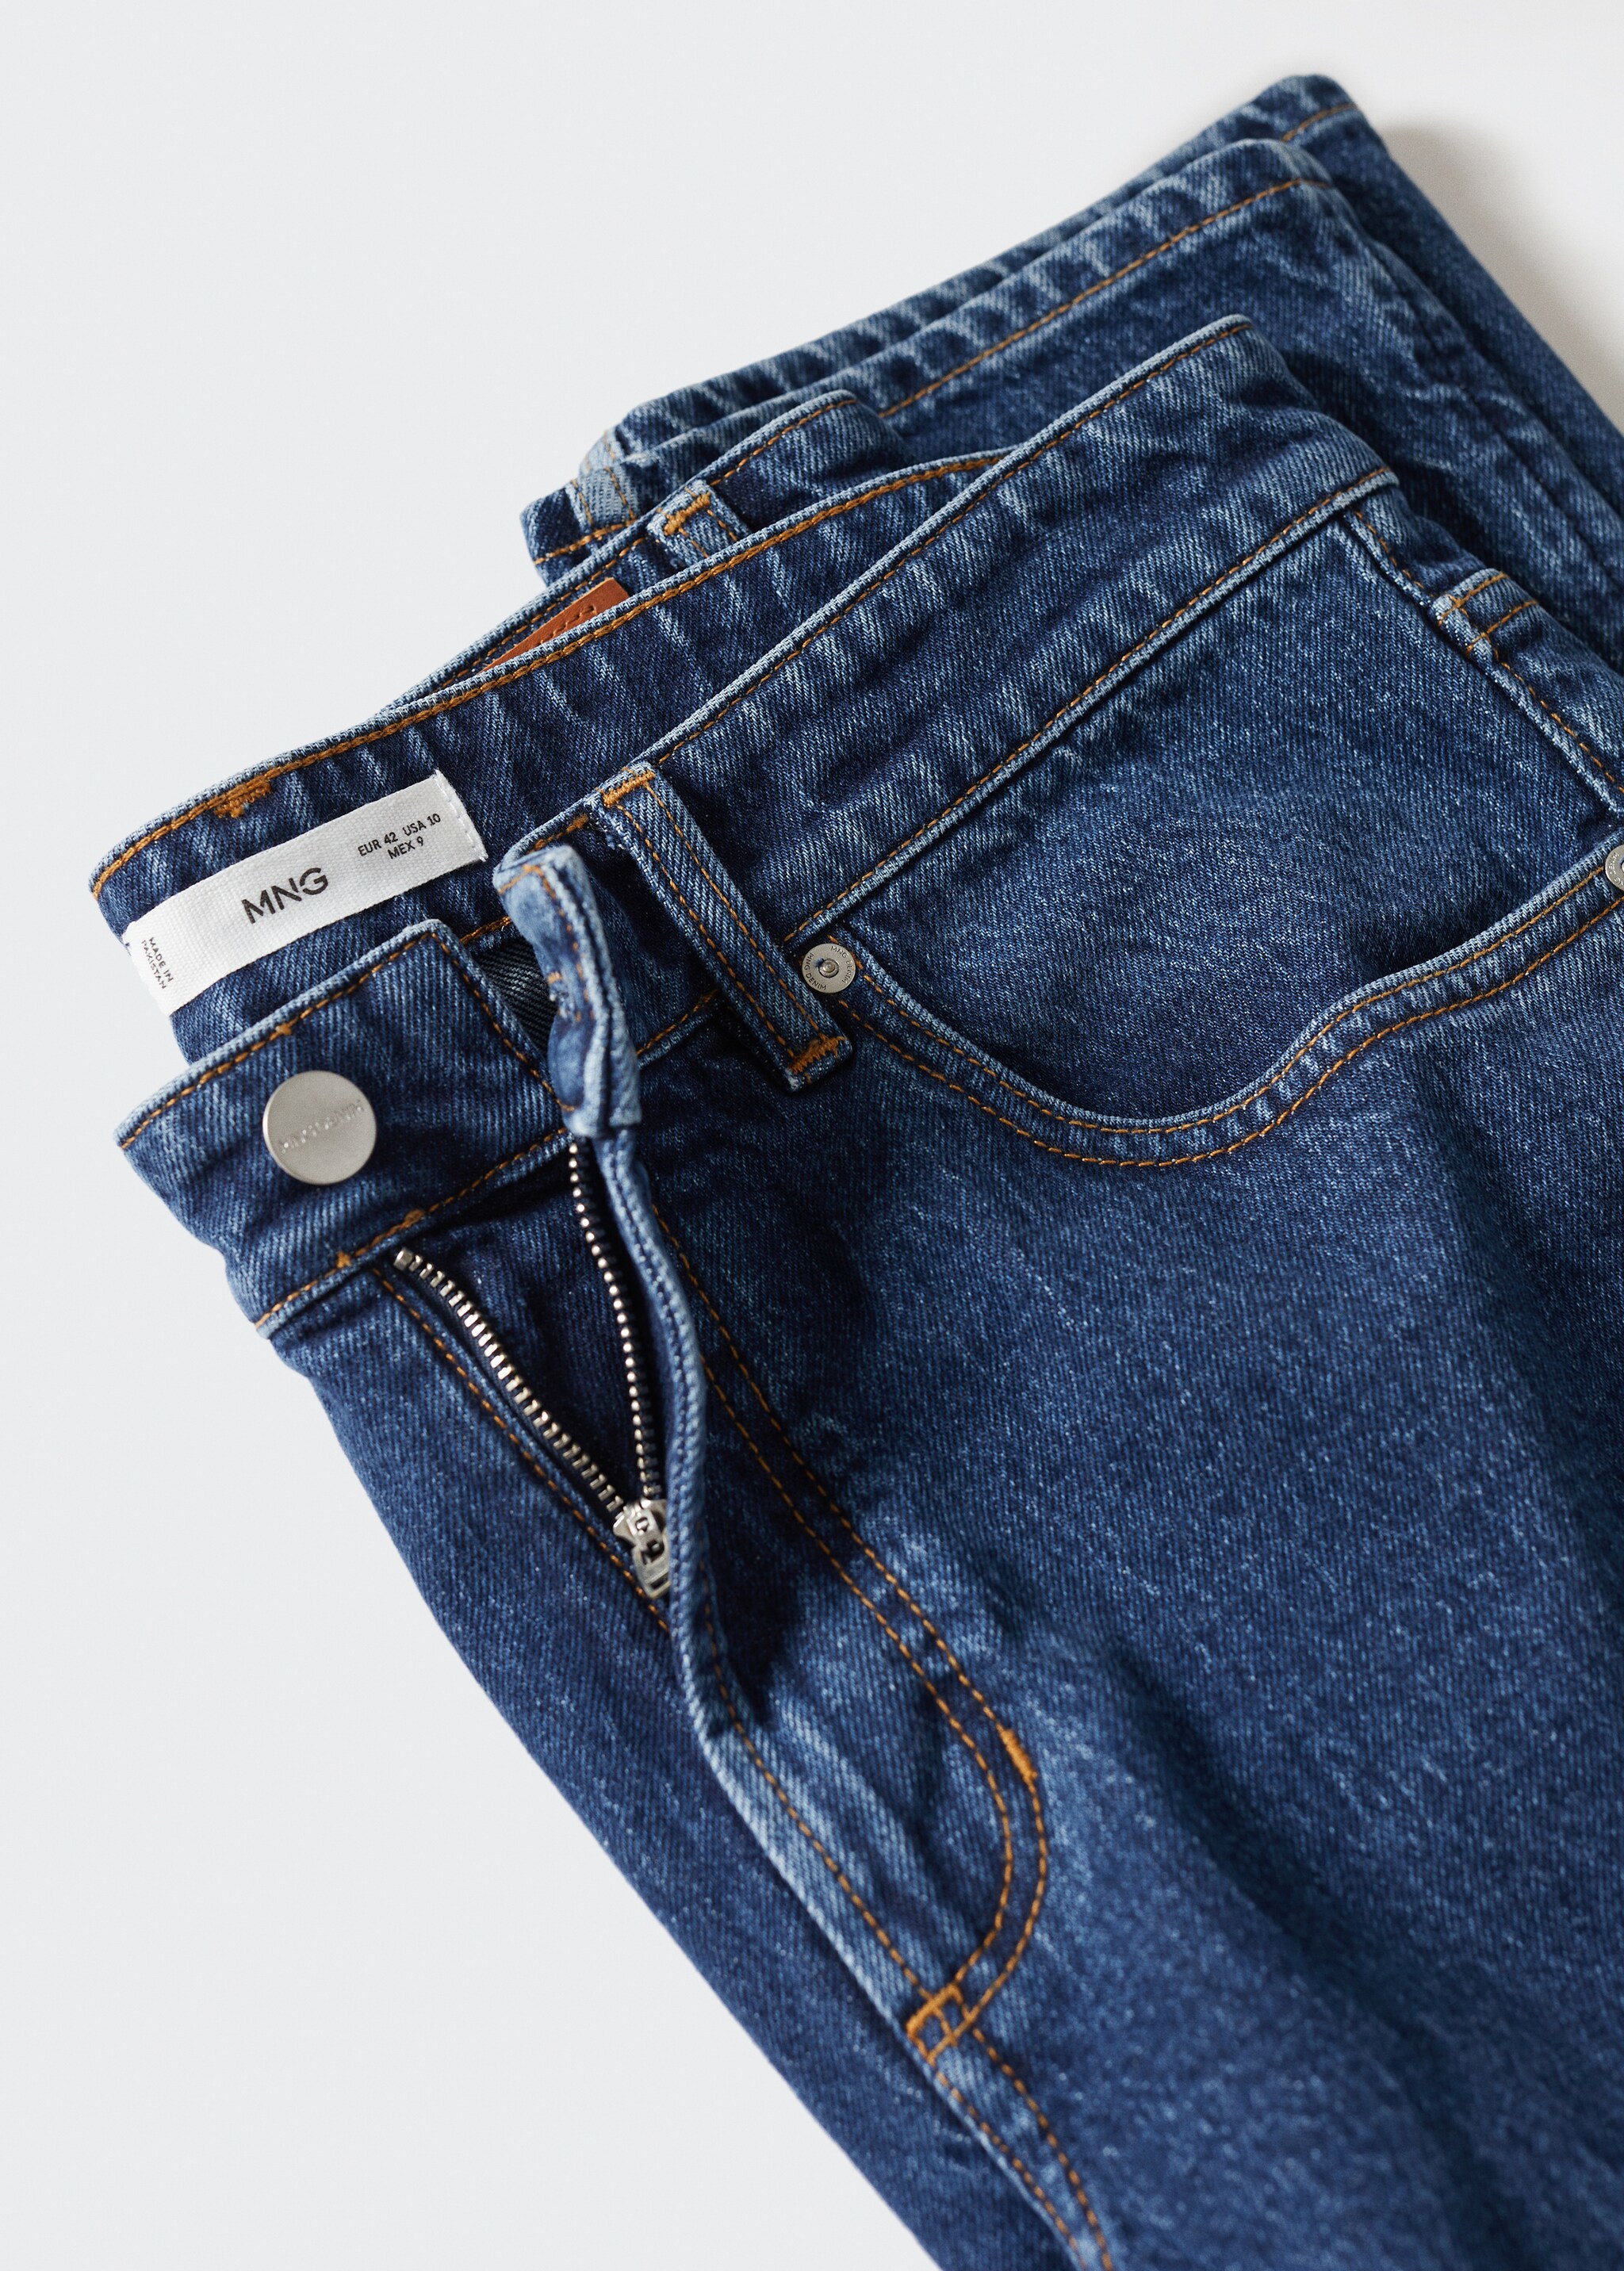 Ben tapered cropped jeans - Details of the article 8